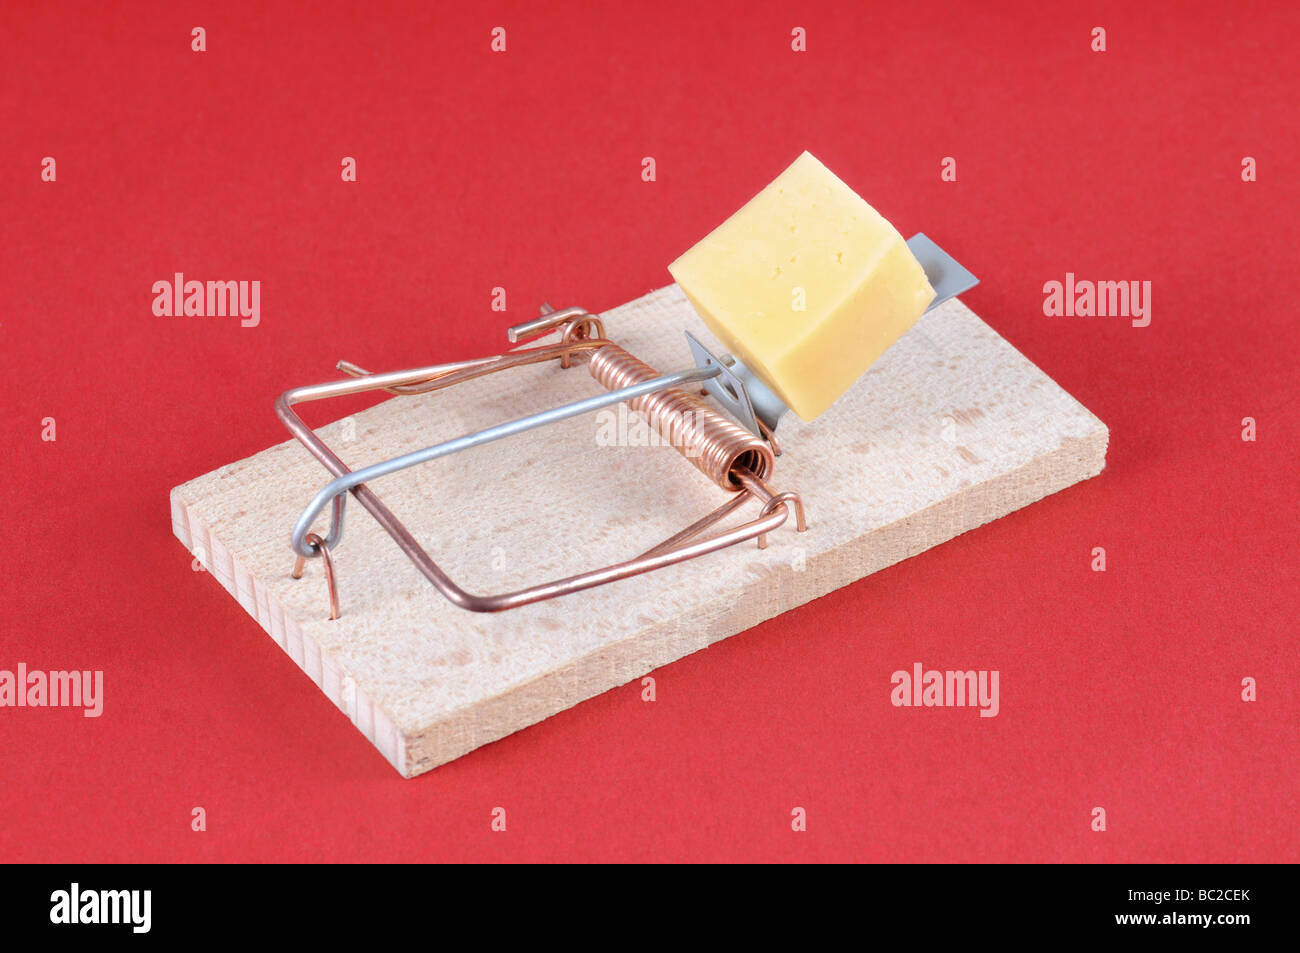 Mousetrap with a piece of cheese on red background. Stock Photo